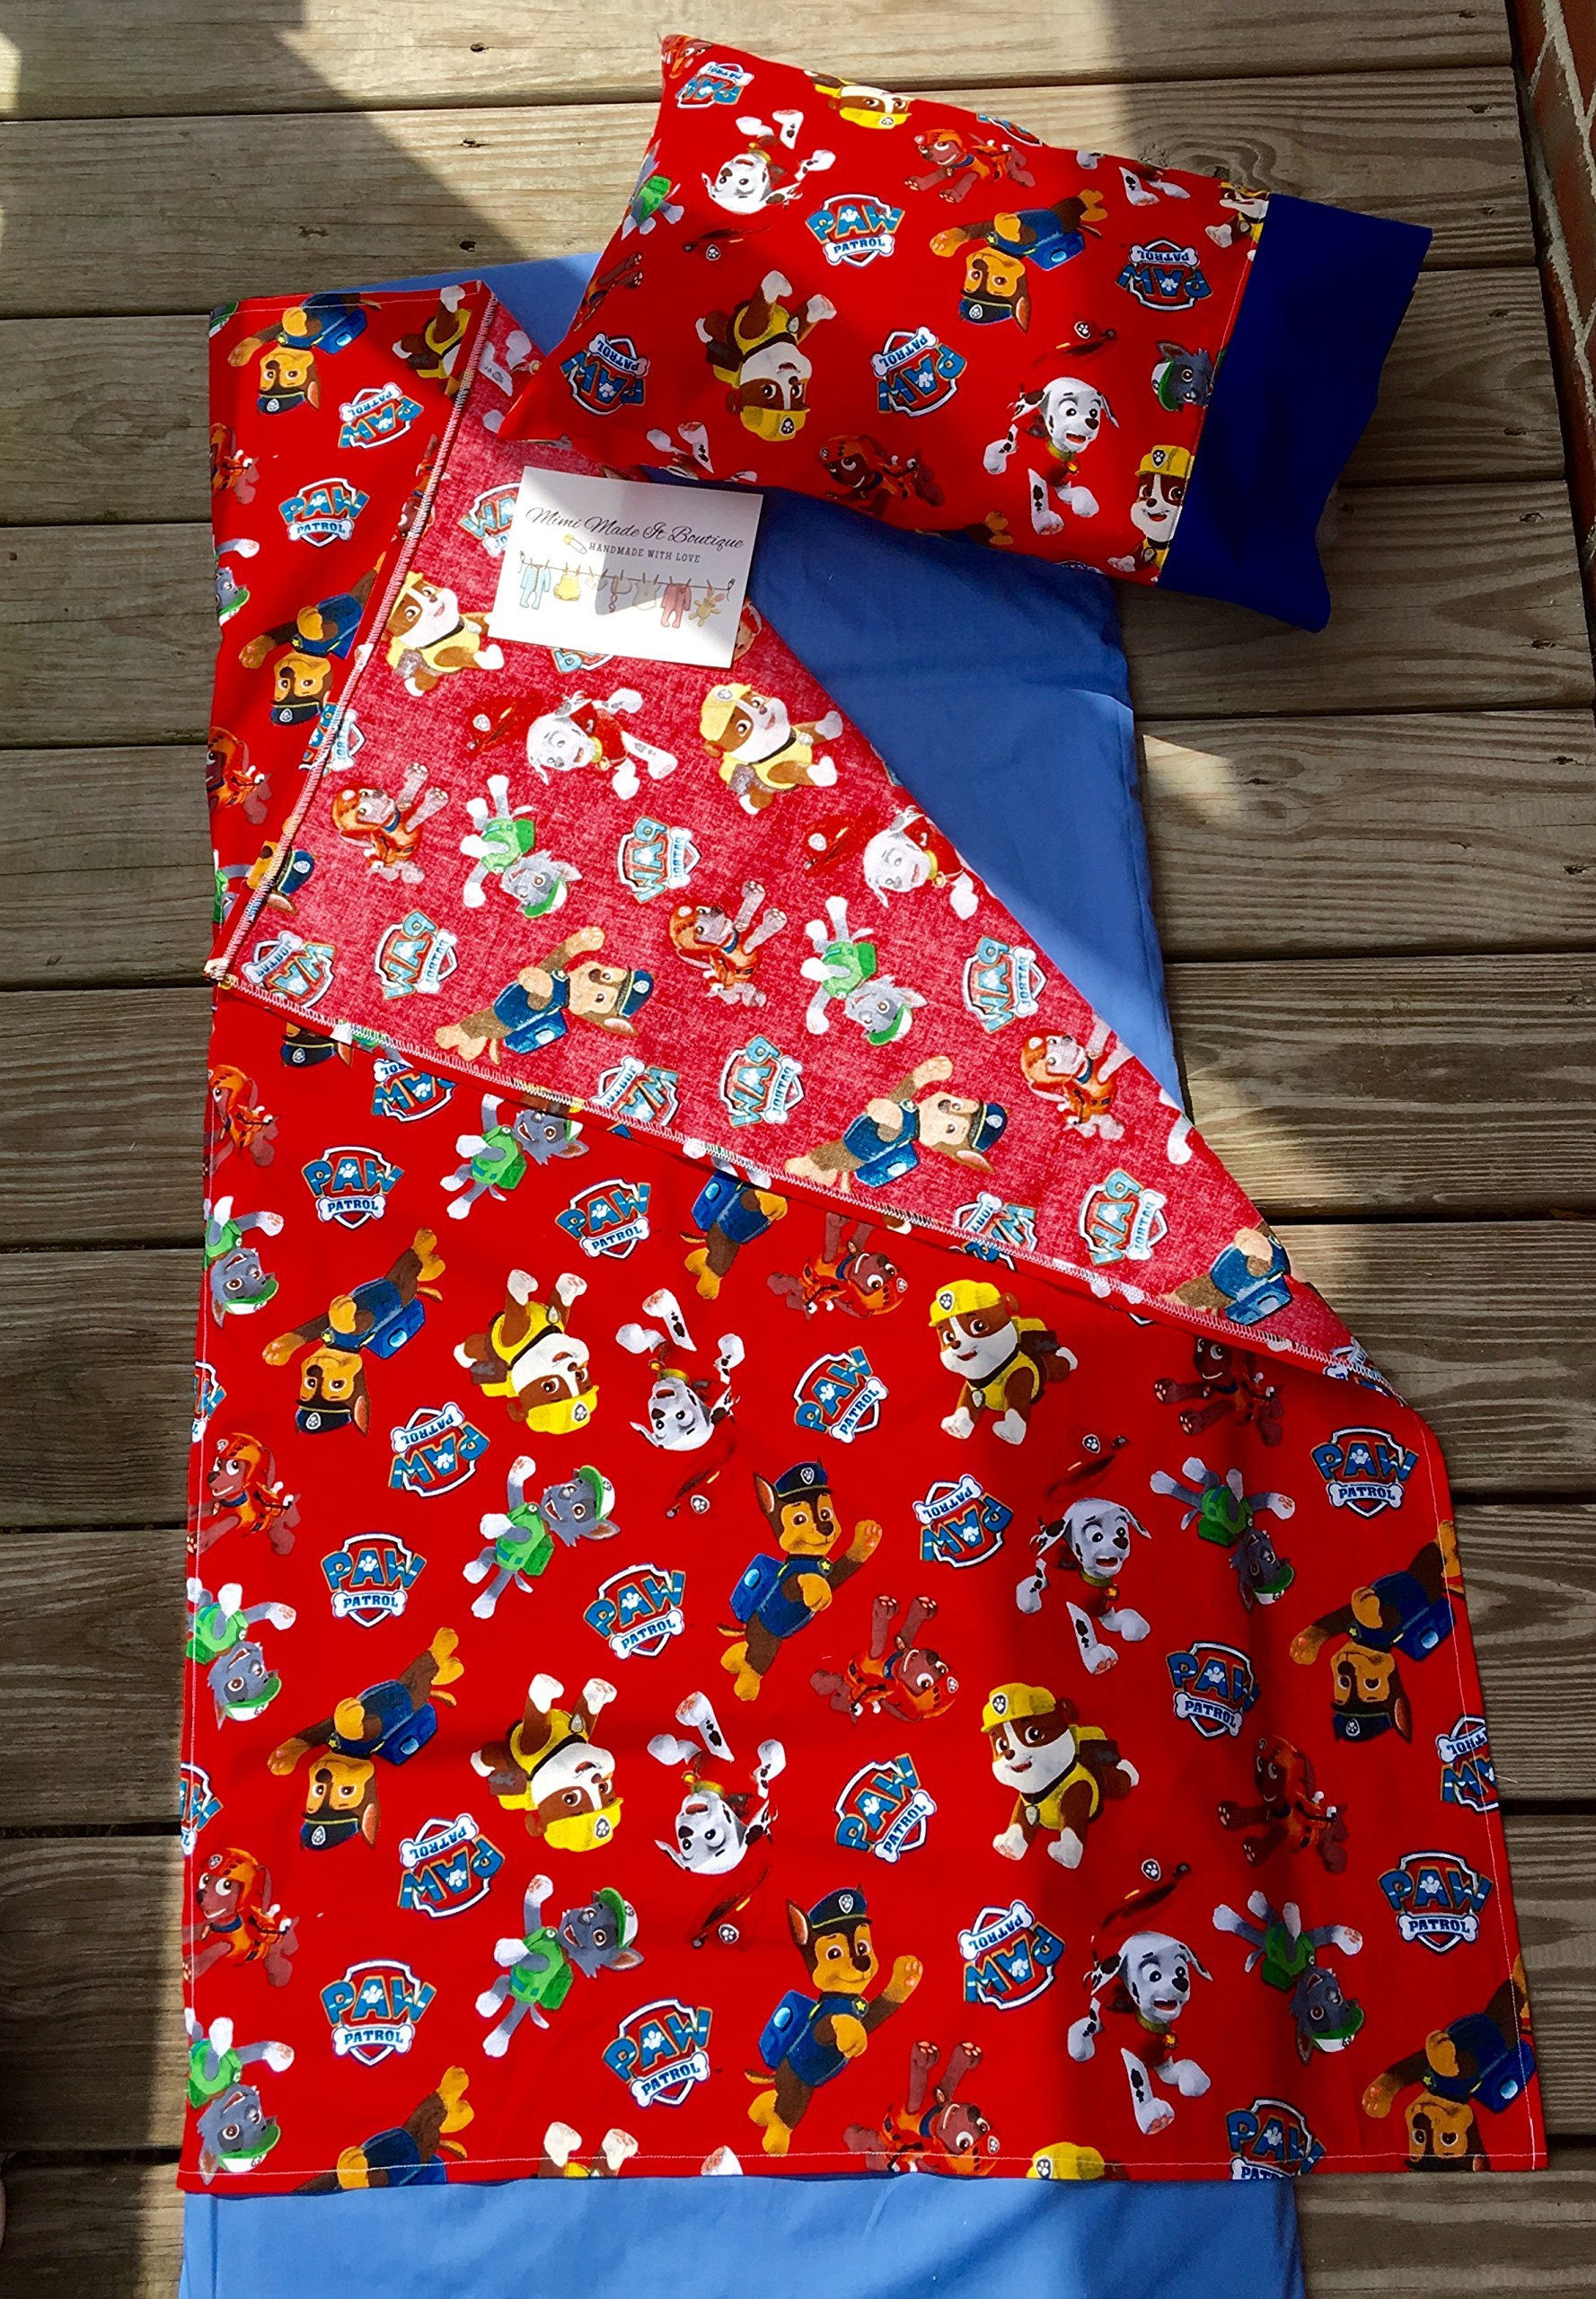 1" Kinder mat Cover- PAW Patrol- with Attached Blanket and Matching Pillowcase